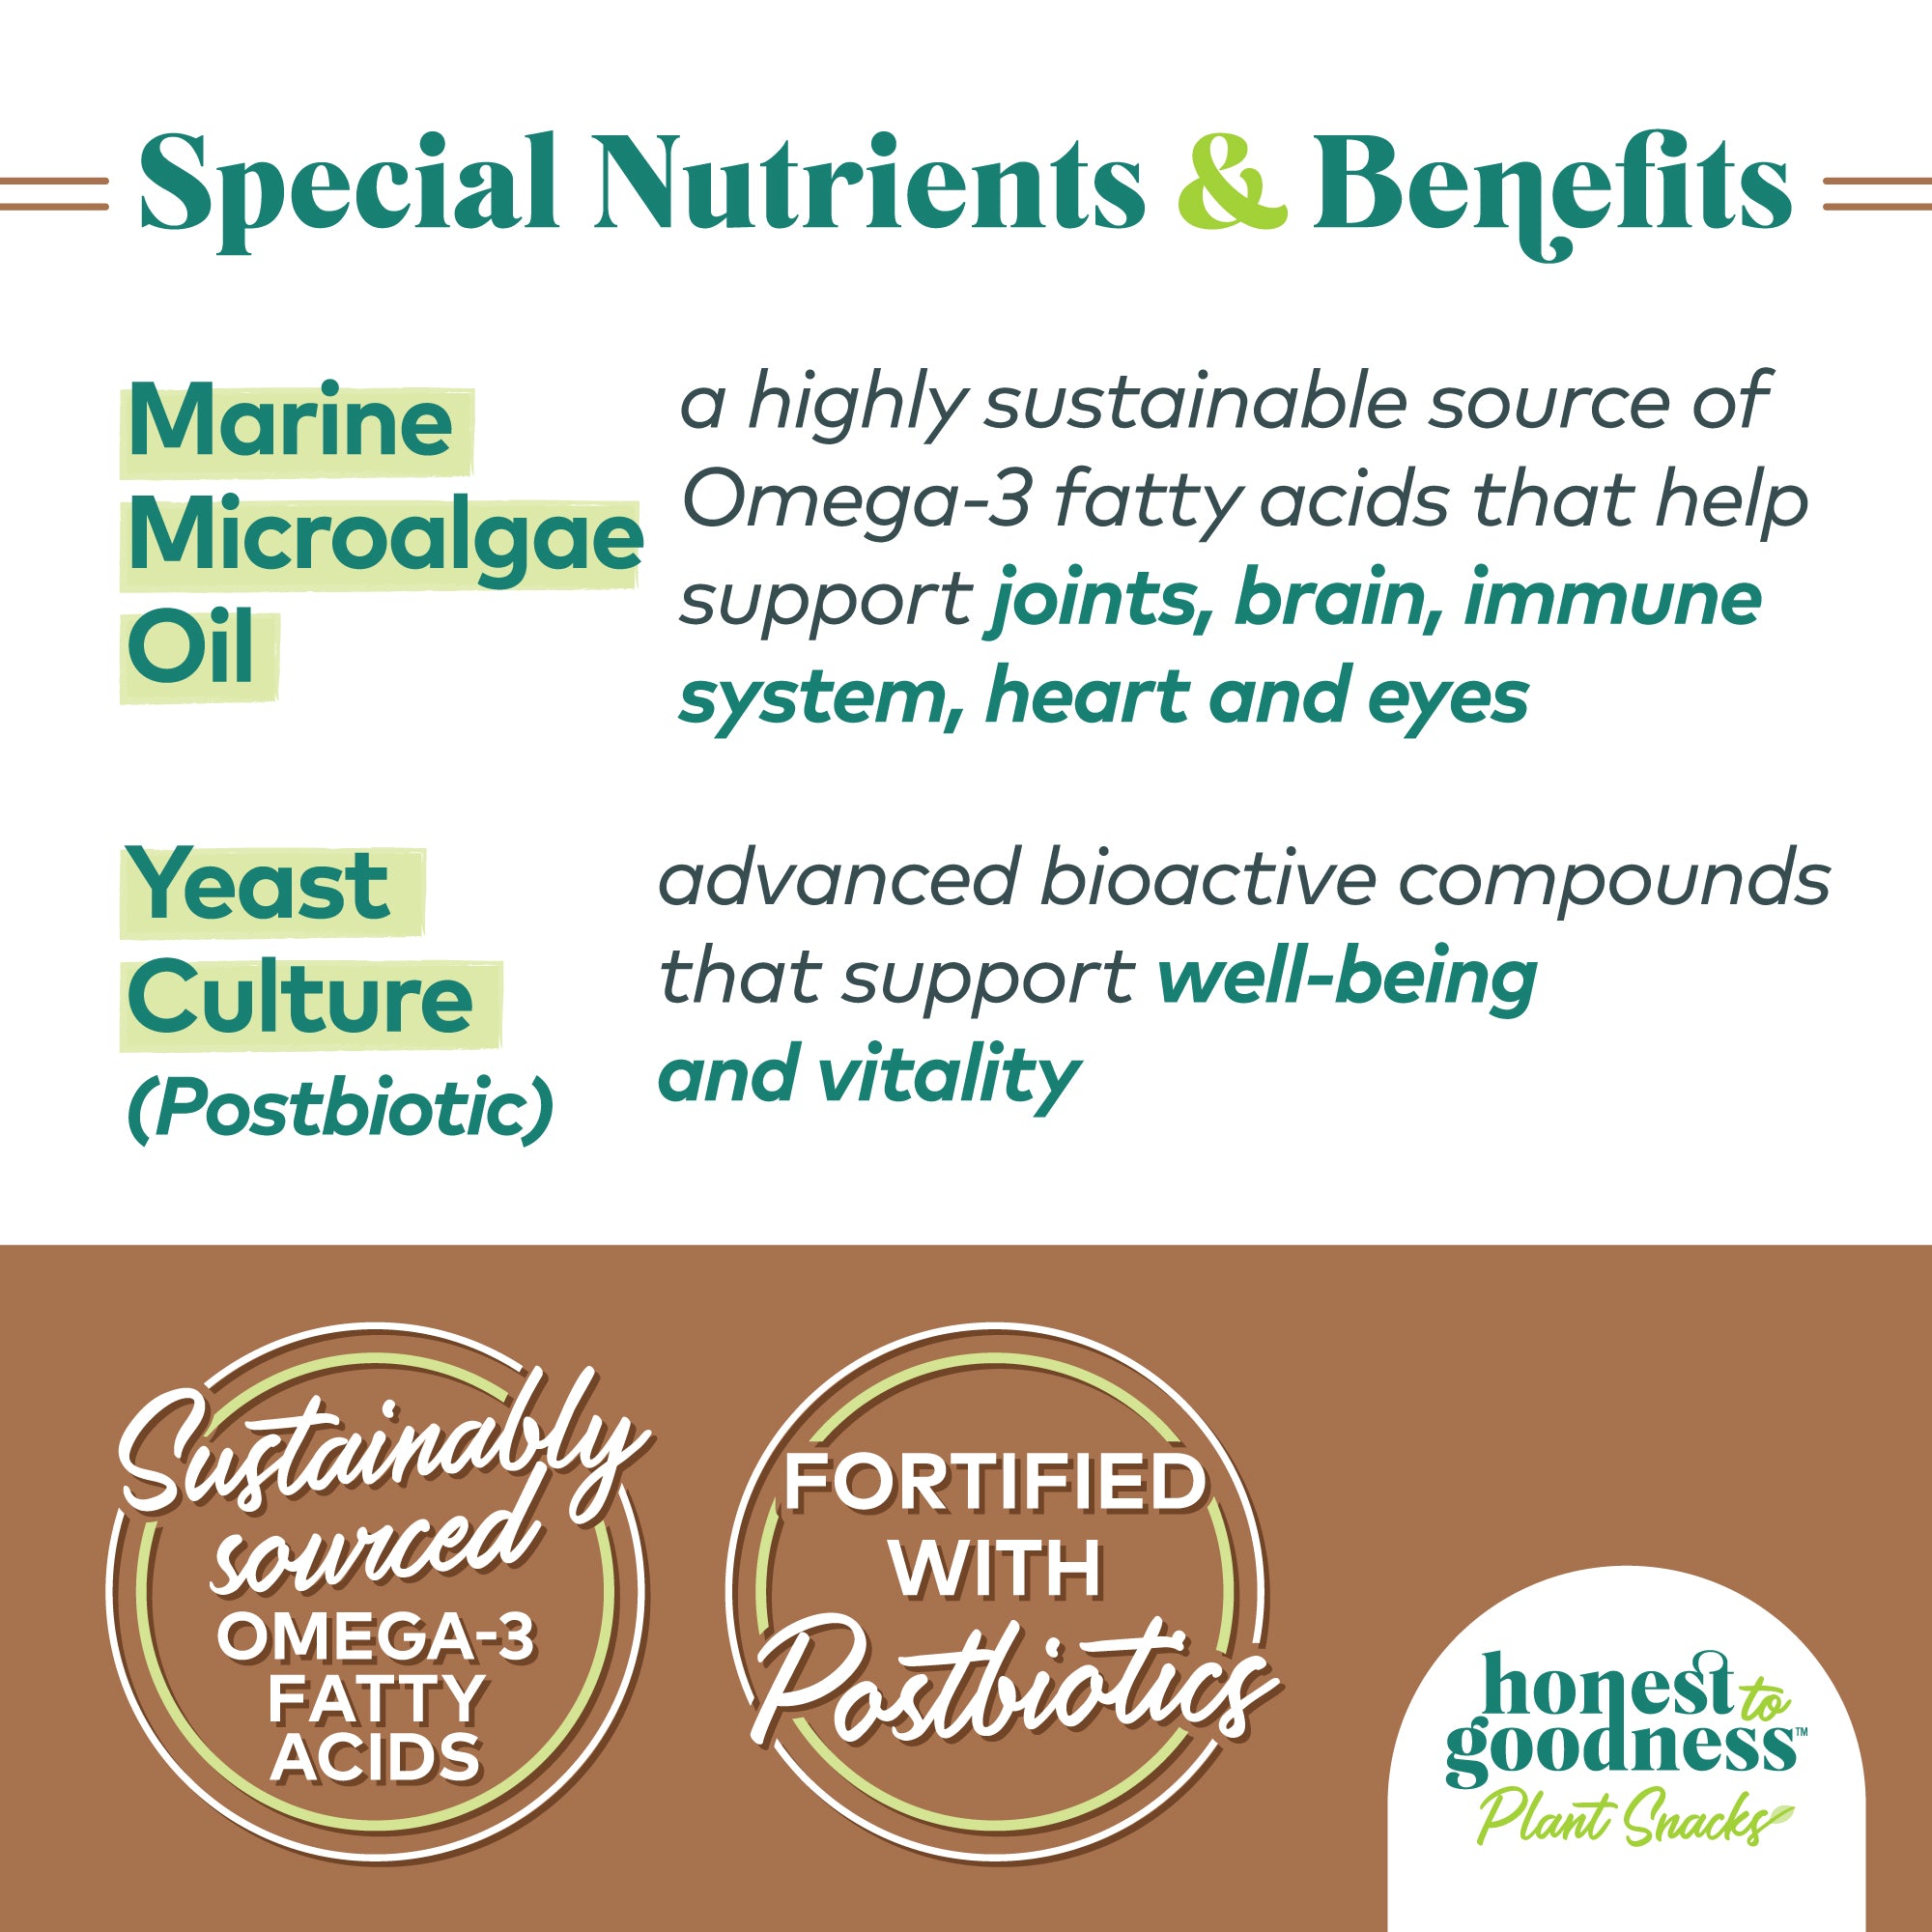 Special nutrients and benefits.  Marine microalgae oil which is a highly sustainable source of Omega-3 fatty acids that help support joints, brain, immune system, heart and eyes.  Yeast culture (postbiotic) is an advanced bioactive compound that supports well-being and vitality.  Honest to Goodness plant snacks are fortified with postbiotics and sustainably sourced omega-3 fatty acids.